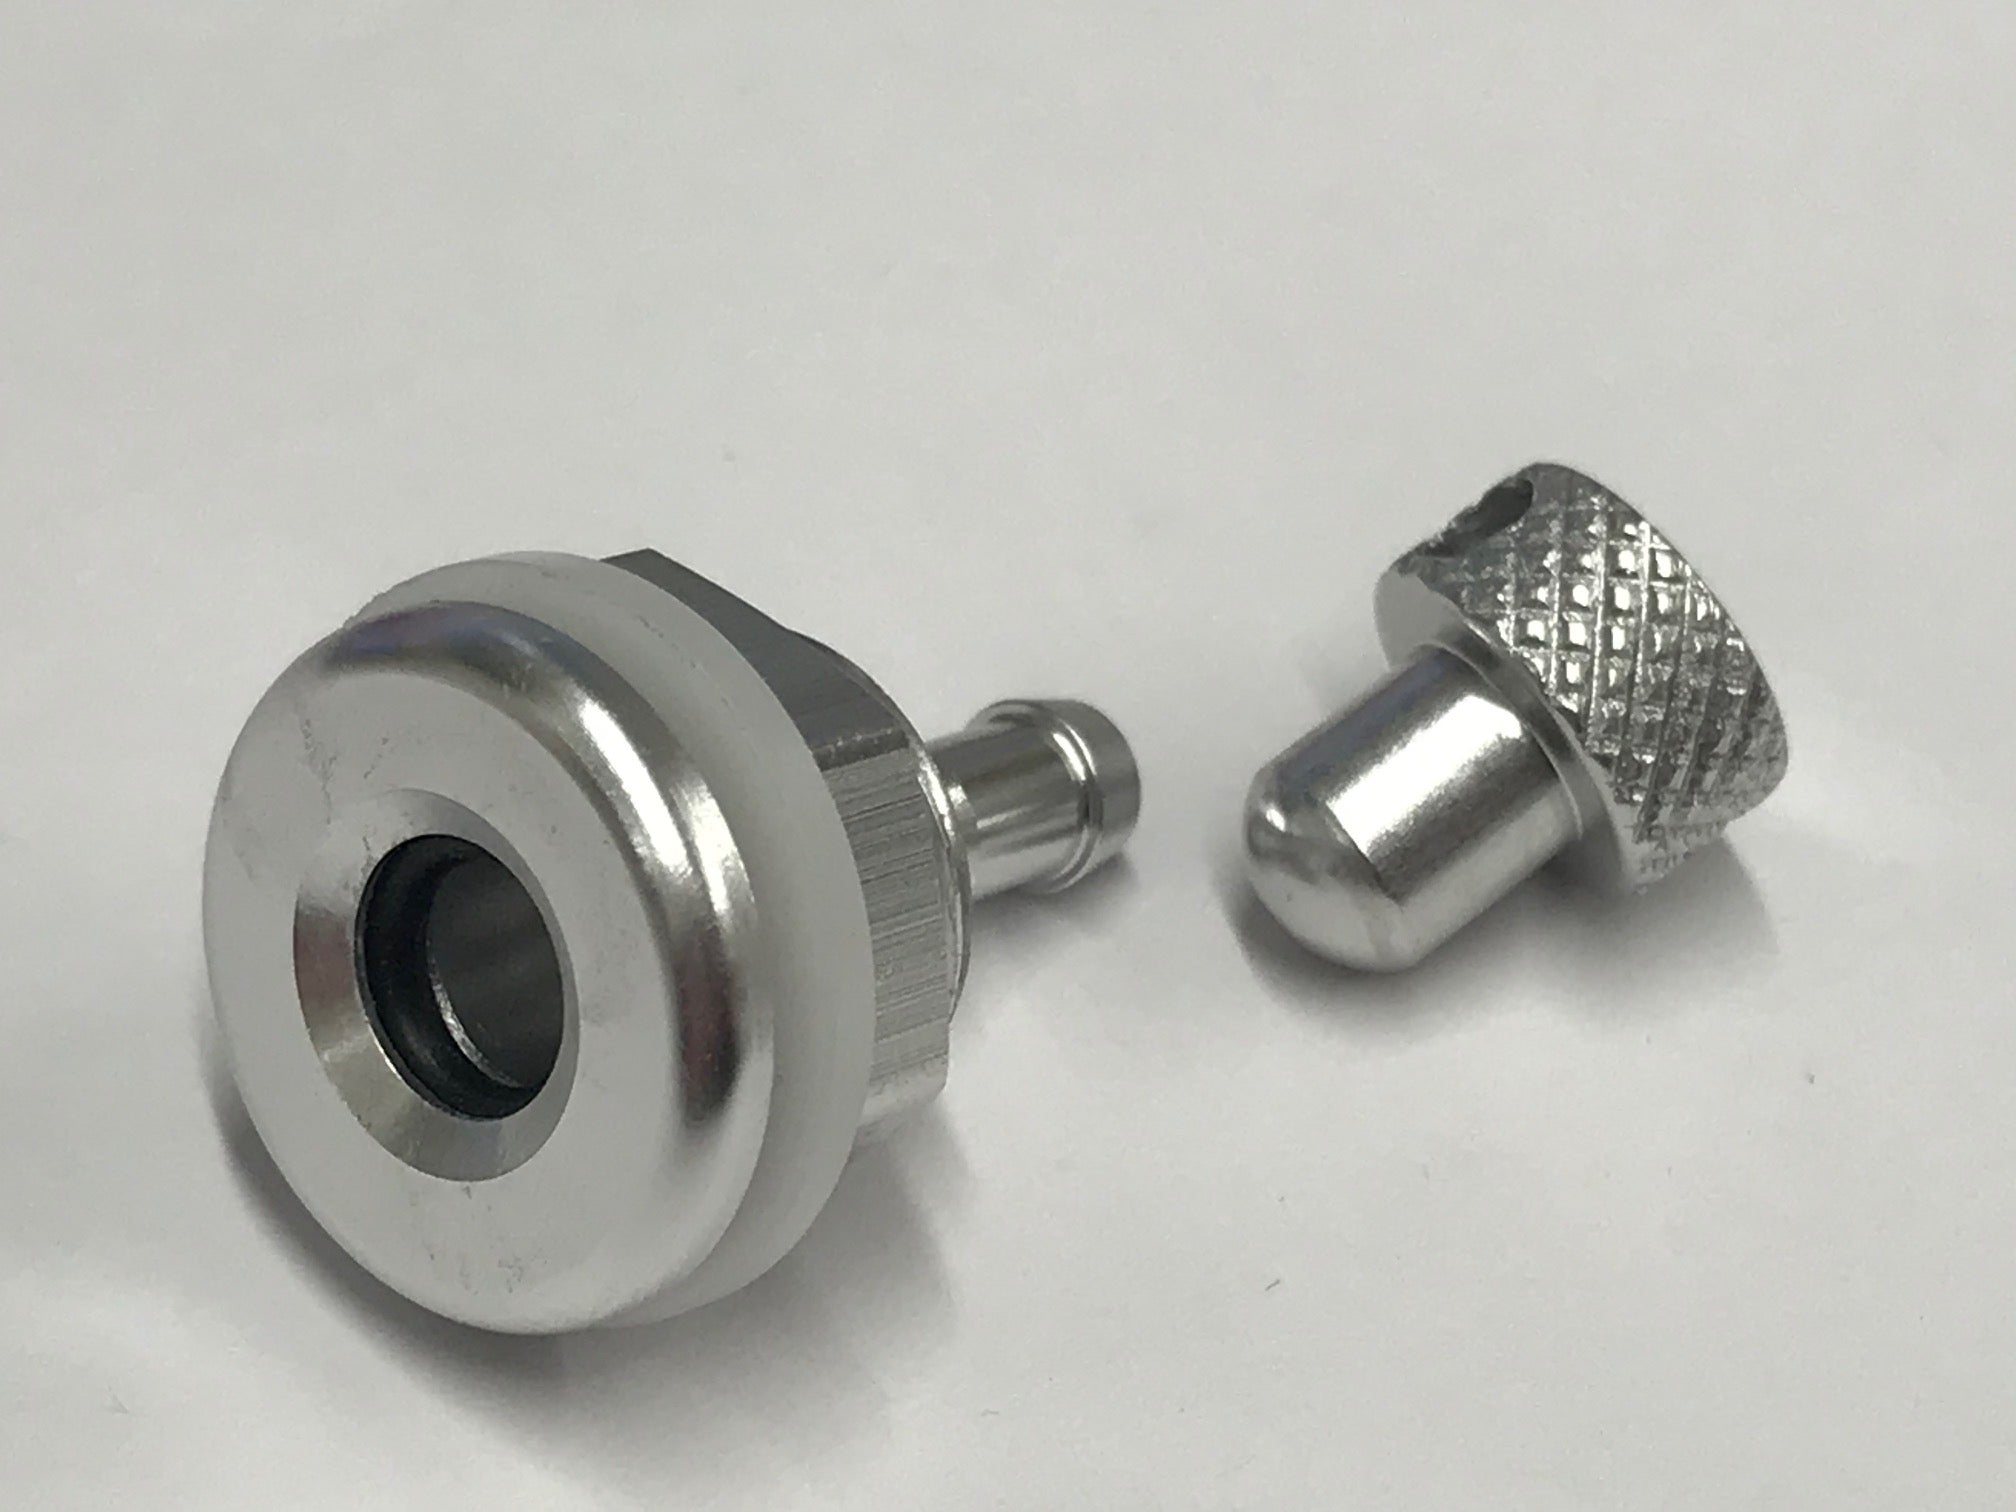 Intairco High Flow 6mm Fuselage Vent Fitting with Blanking Plug 4mm Barb IAC-317-2